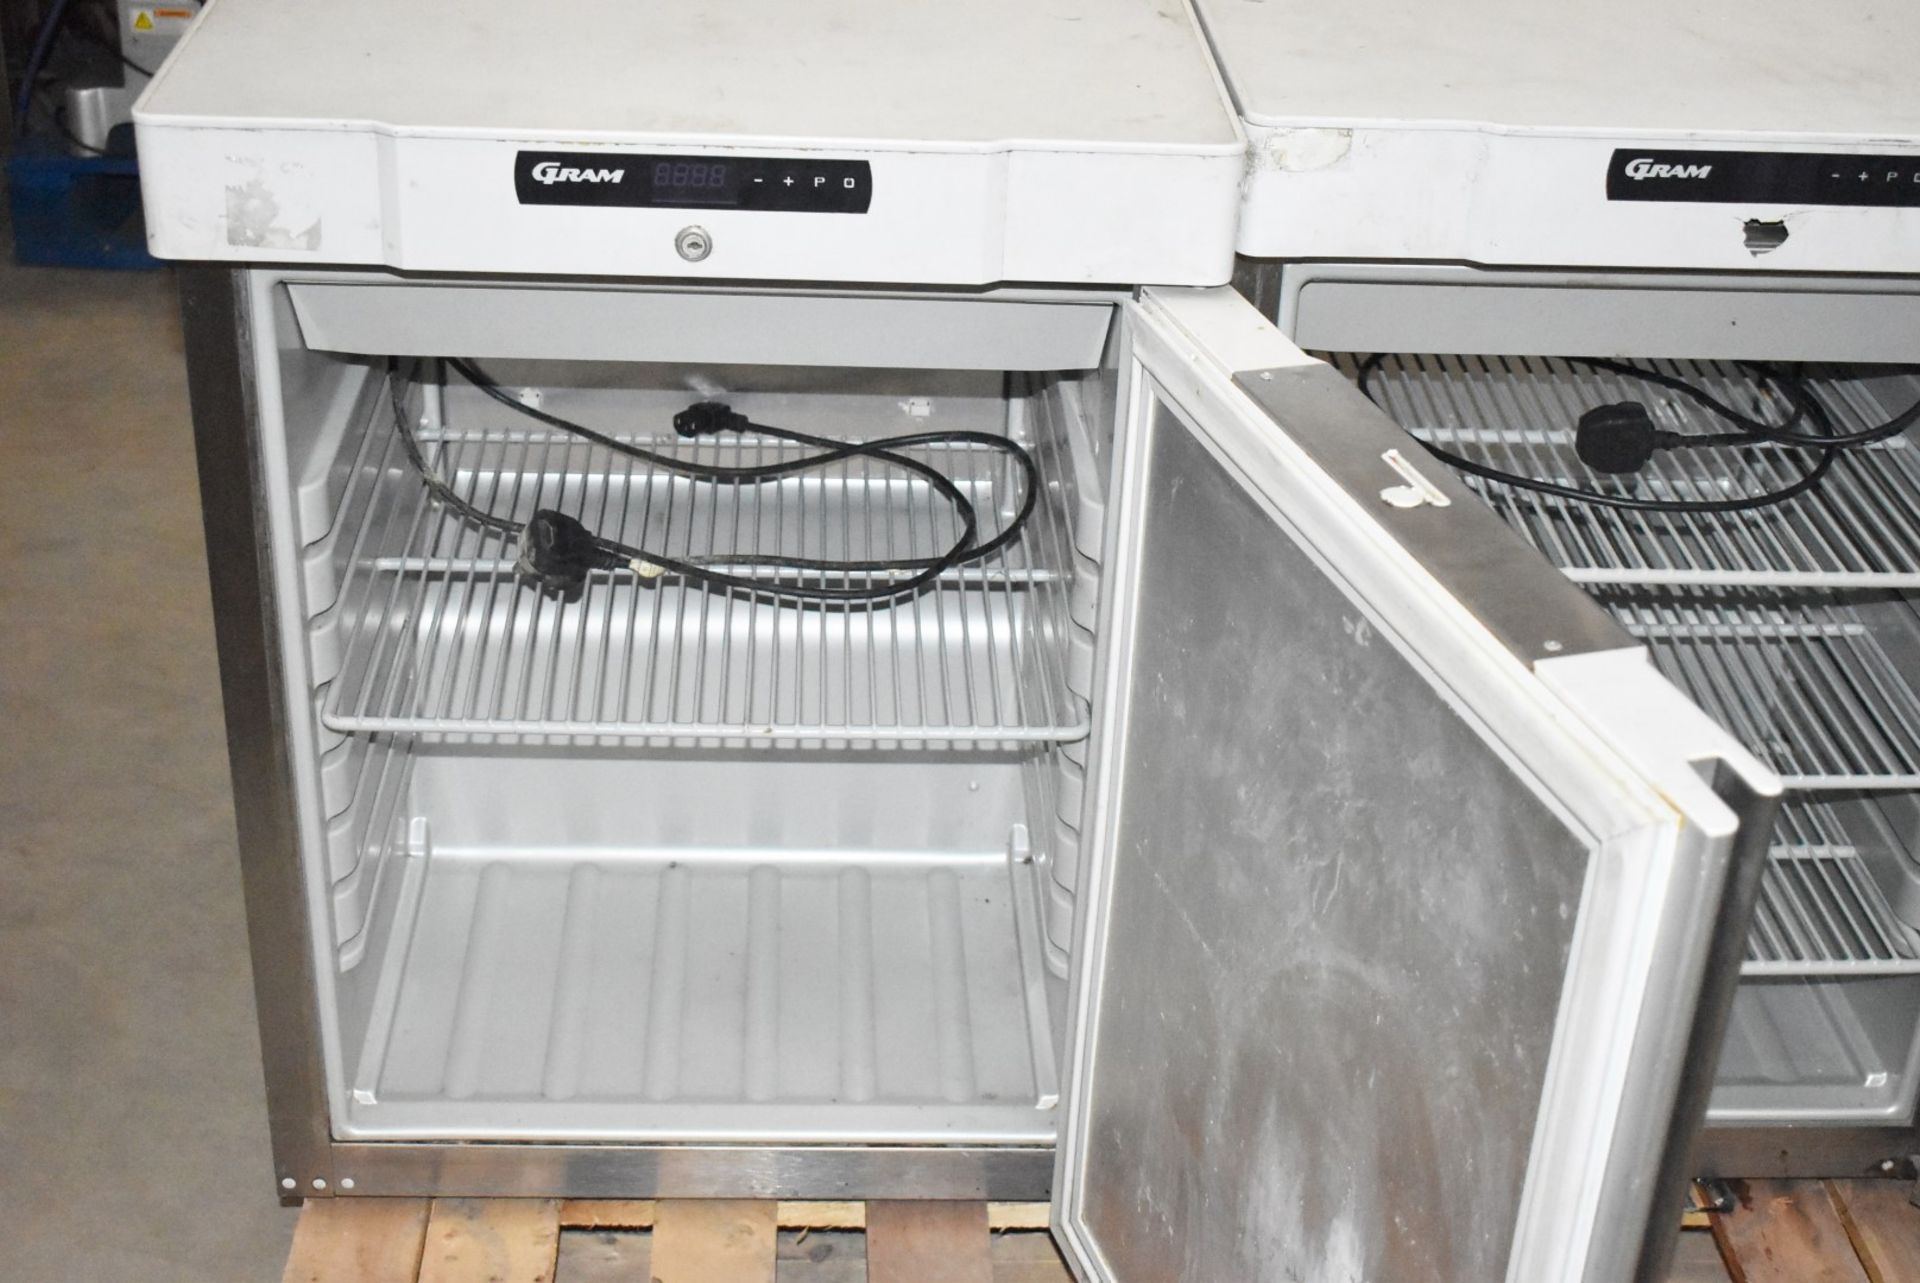 2 x Gram F 210 RG 3N 125 Ltr Undercounter Freezers - Recently Removed From a Restaurant - Image 5 of 8